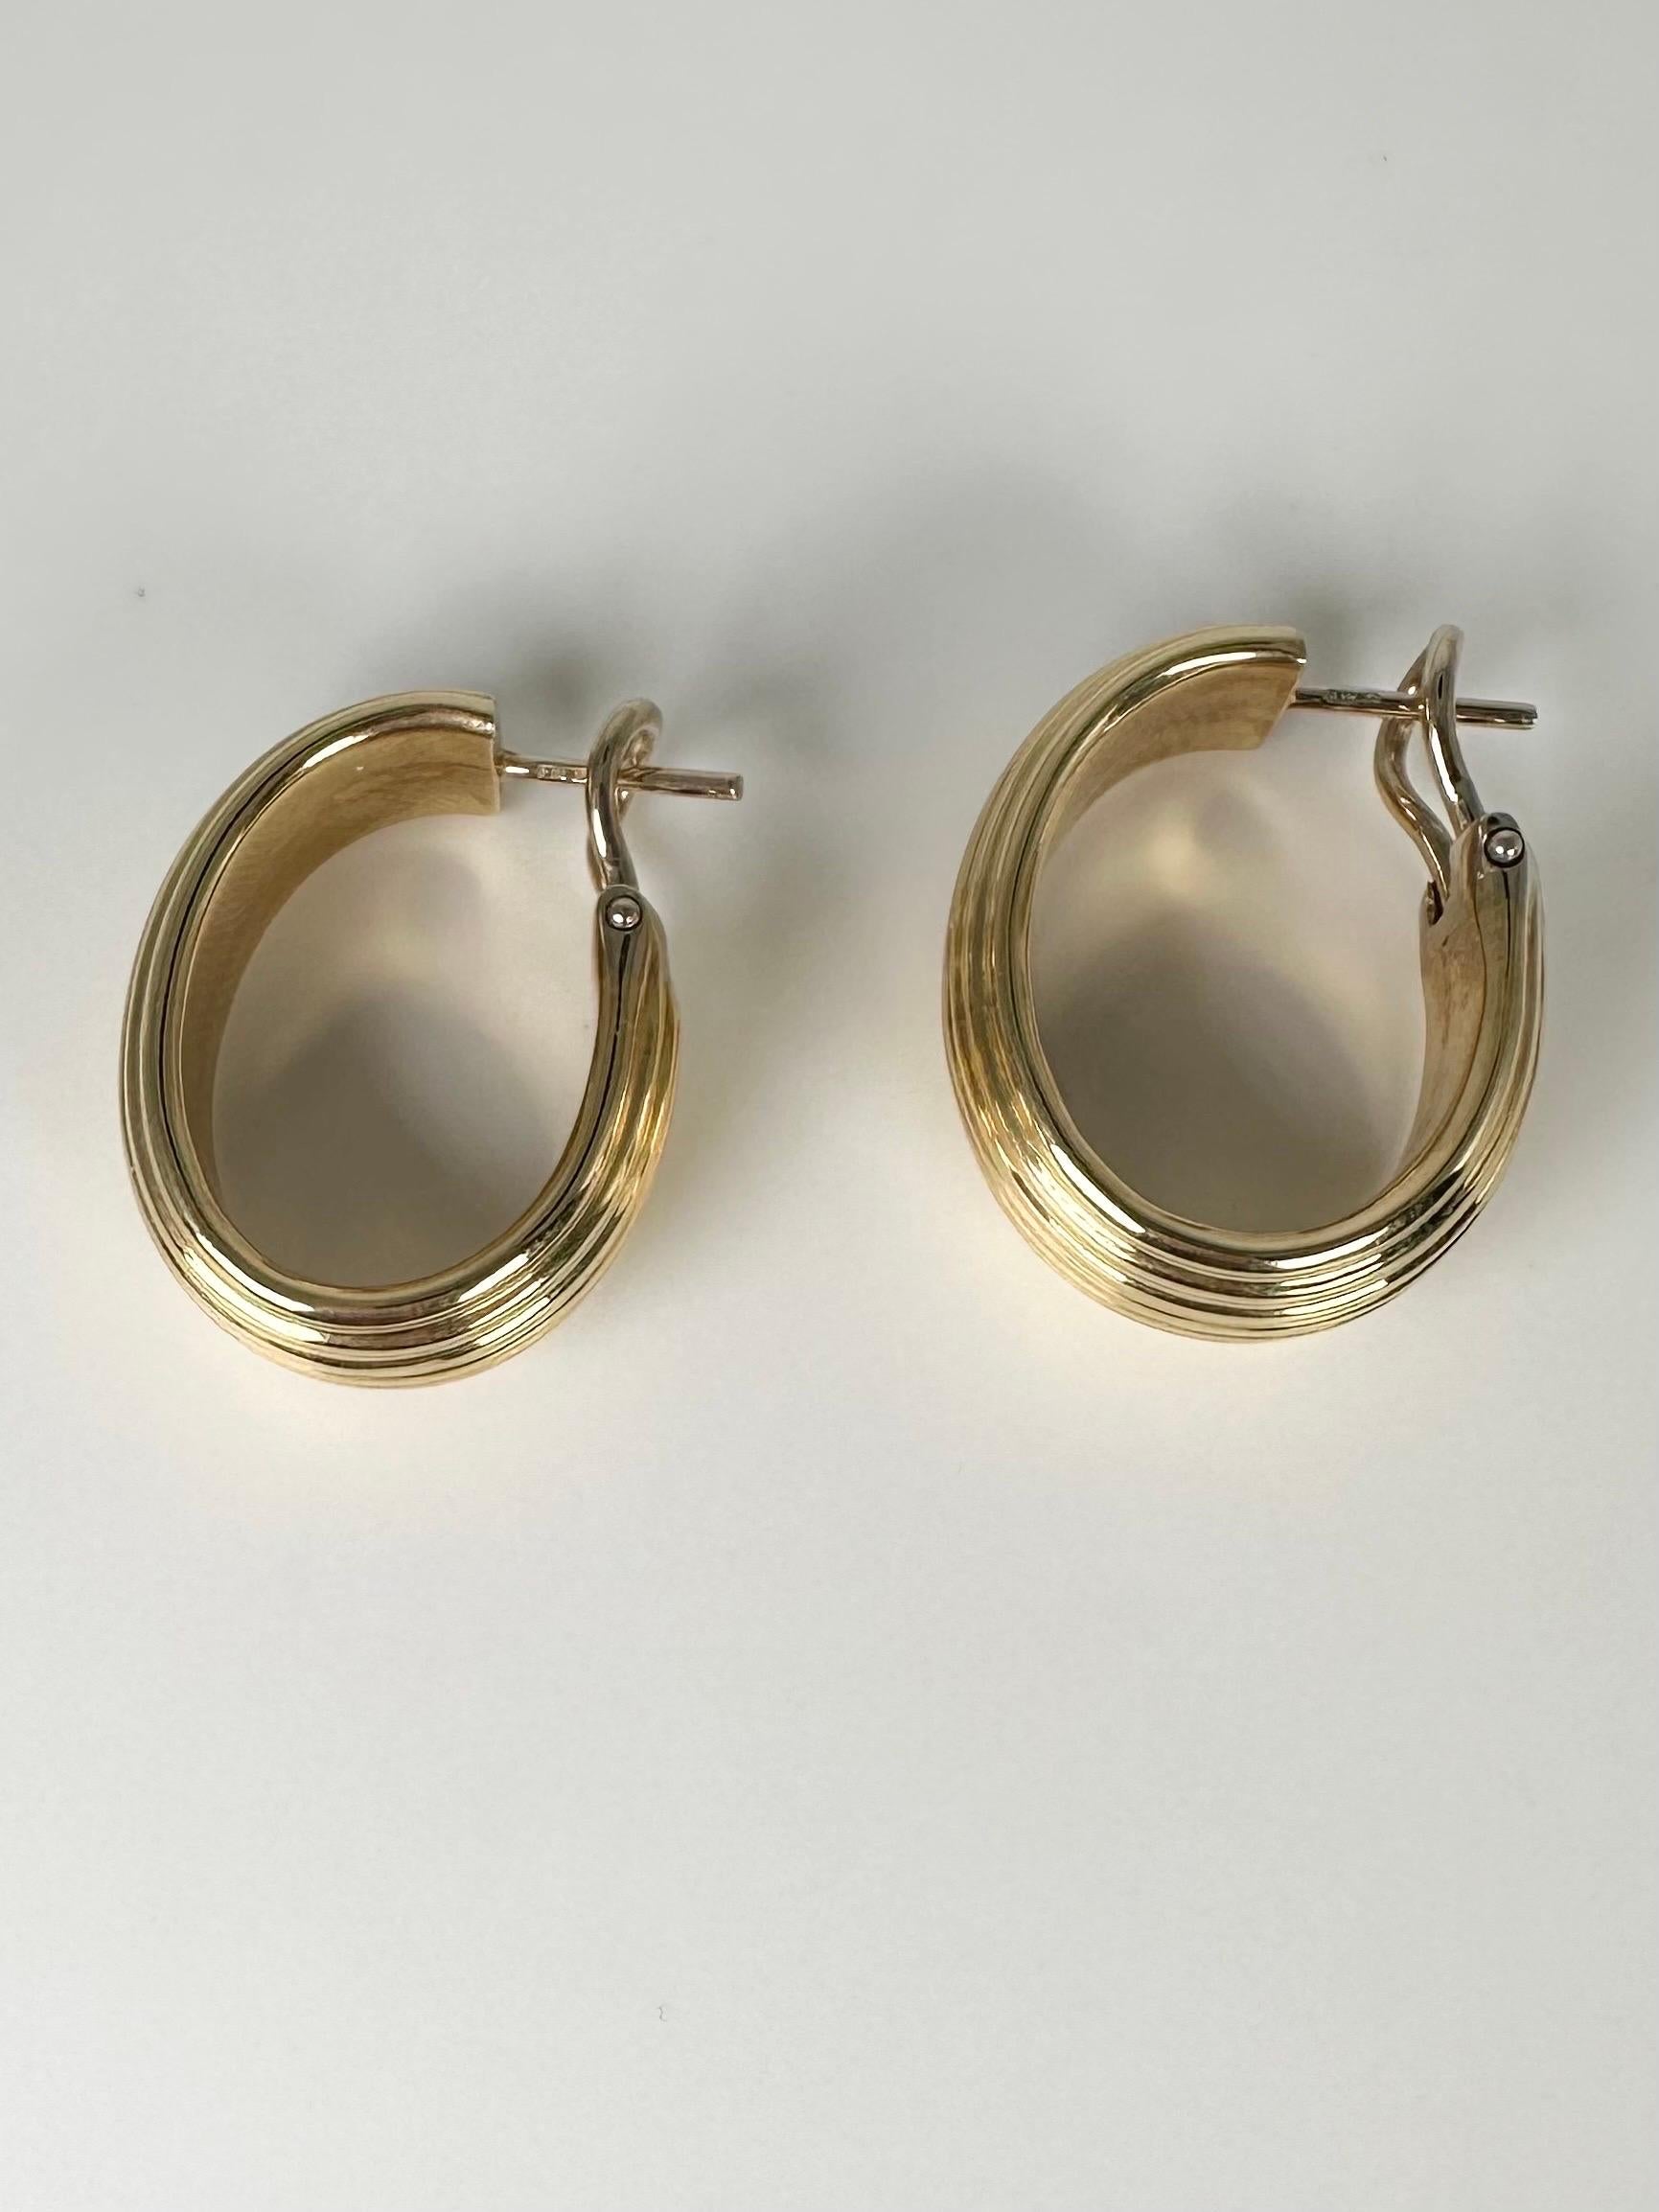 Textured hoop earrings in 18KT yellow gold. Fantastic when on ear, look at the glow on photos and video!

GOLD: 18KT gold
Grams:9.60
size: 7.5
Item#: 425-00001EKP

WHAT YOU GET AT STAMPAR JEWELERS:
Stampar Jewelers, located in the heart of Jupiter,